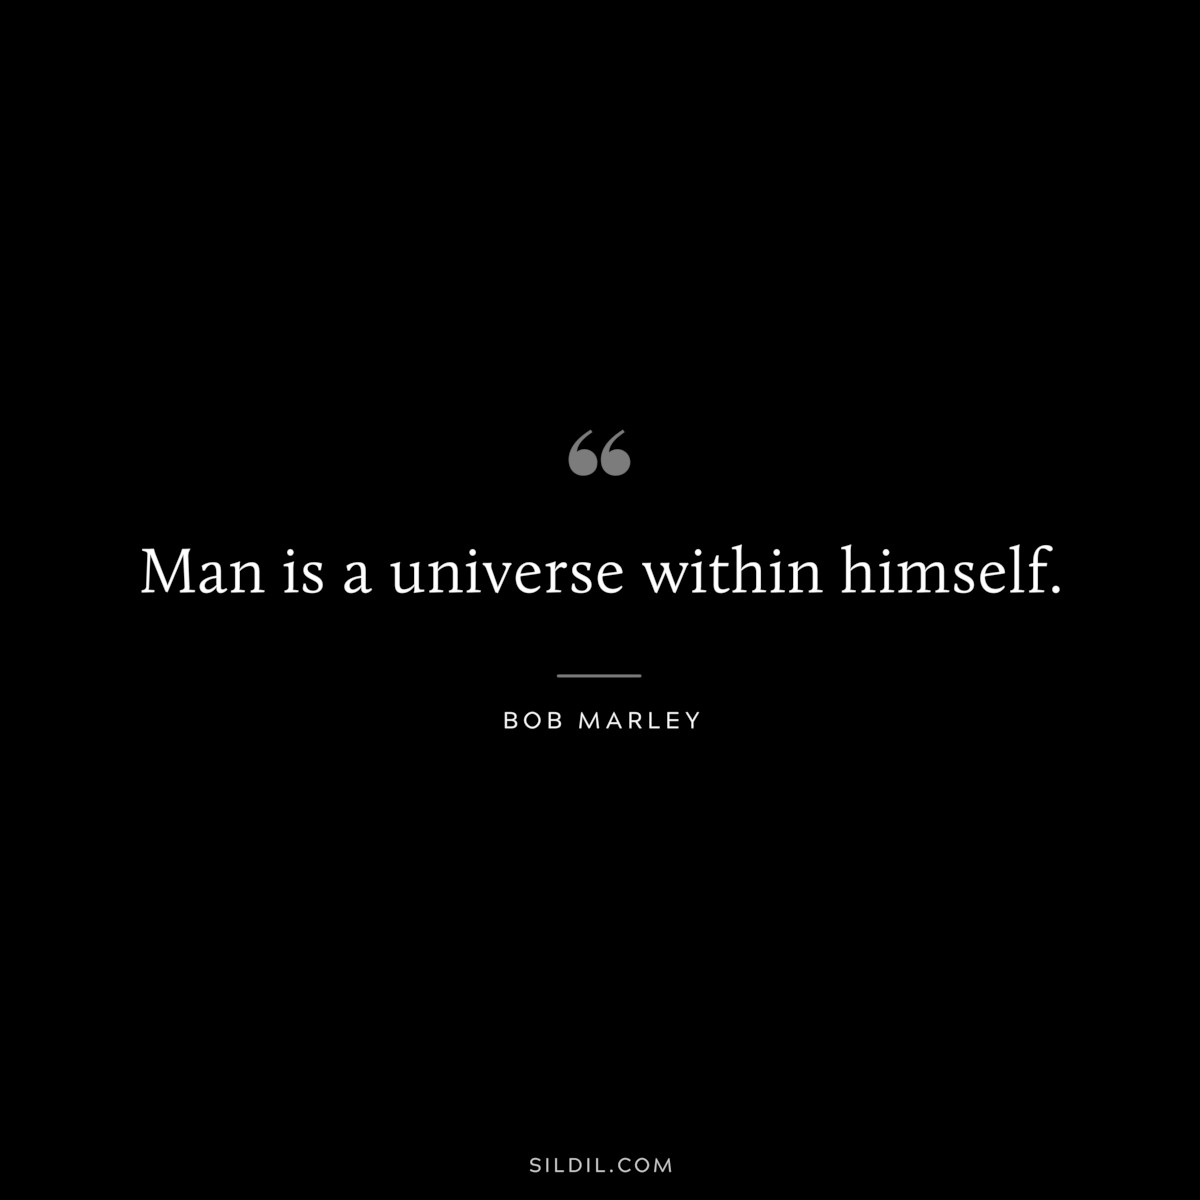 Man is a universe within himself. ― Bob Marley